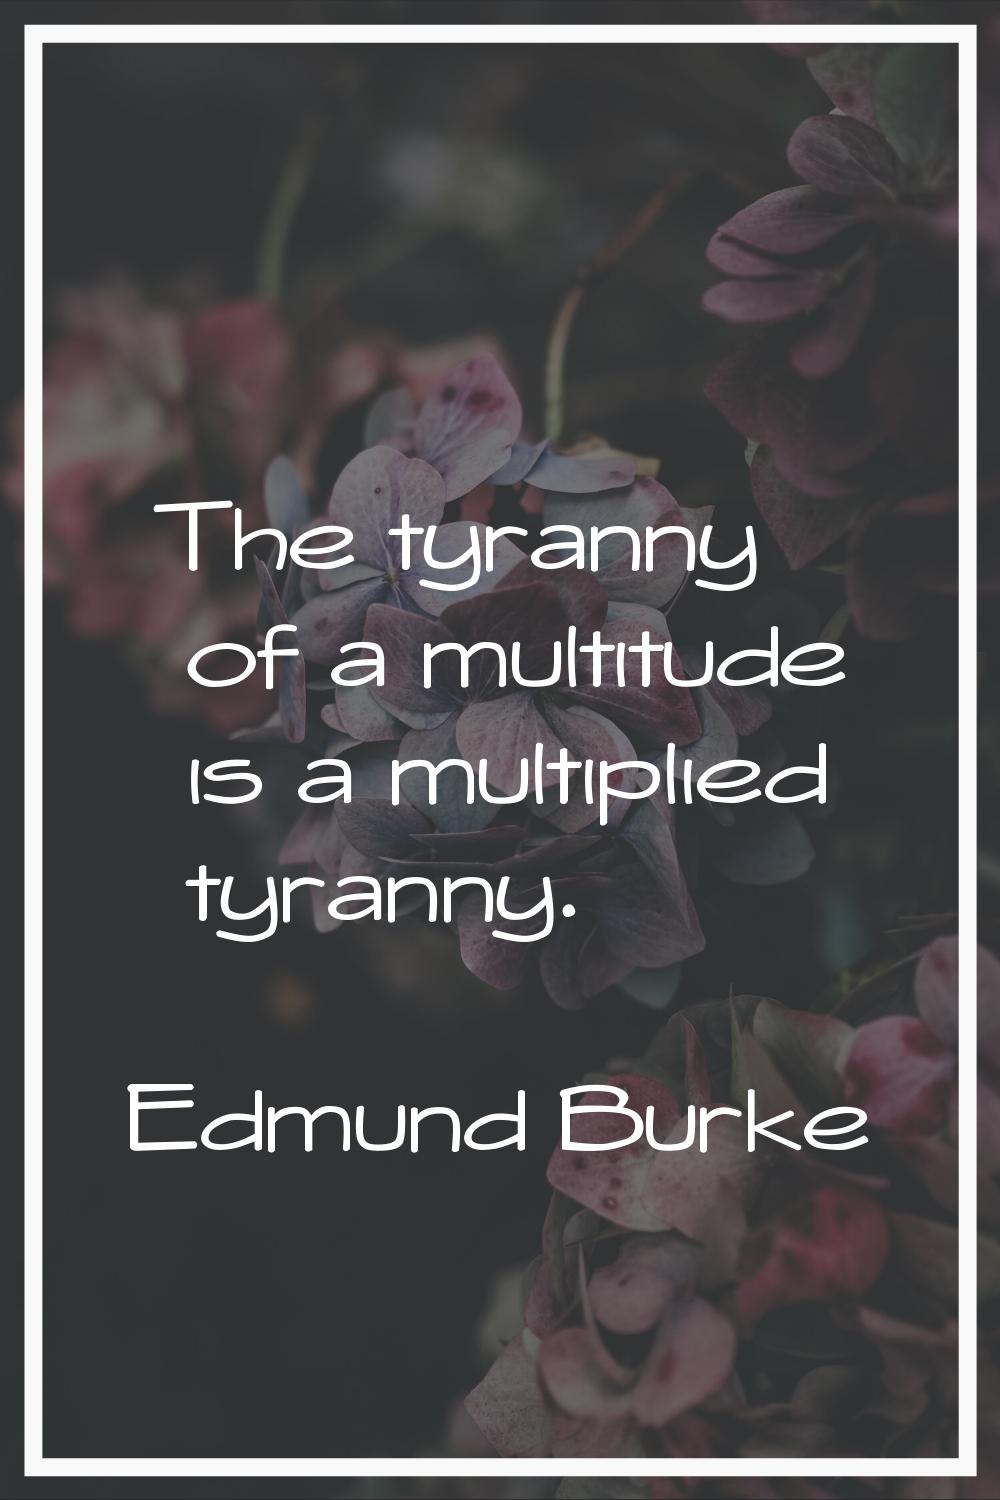 The tyranny of a multitude is a multiplied tyranny.